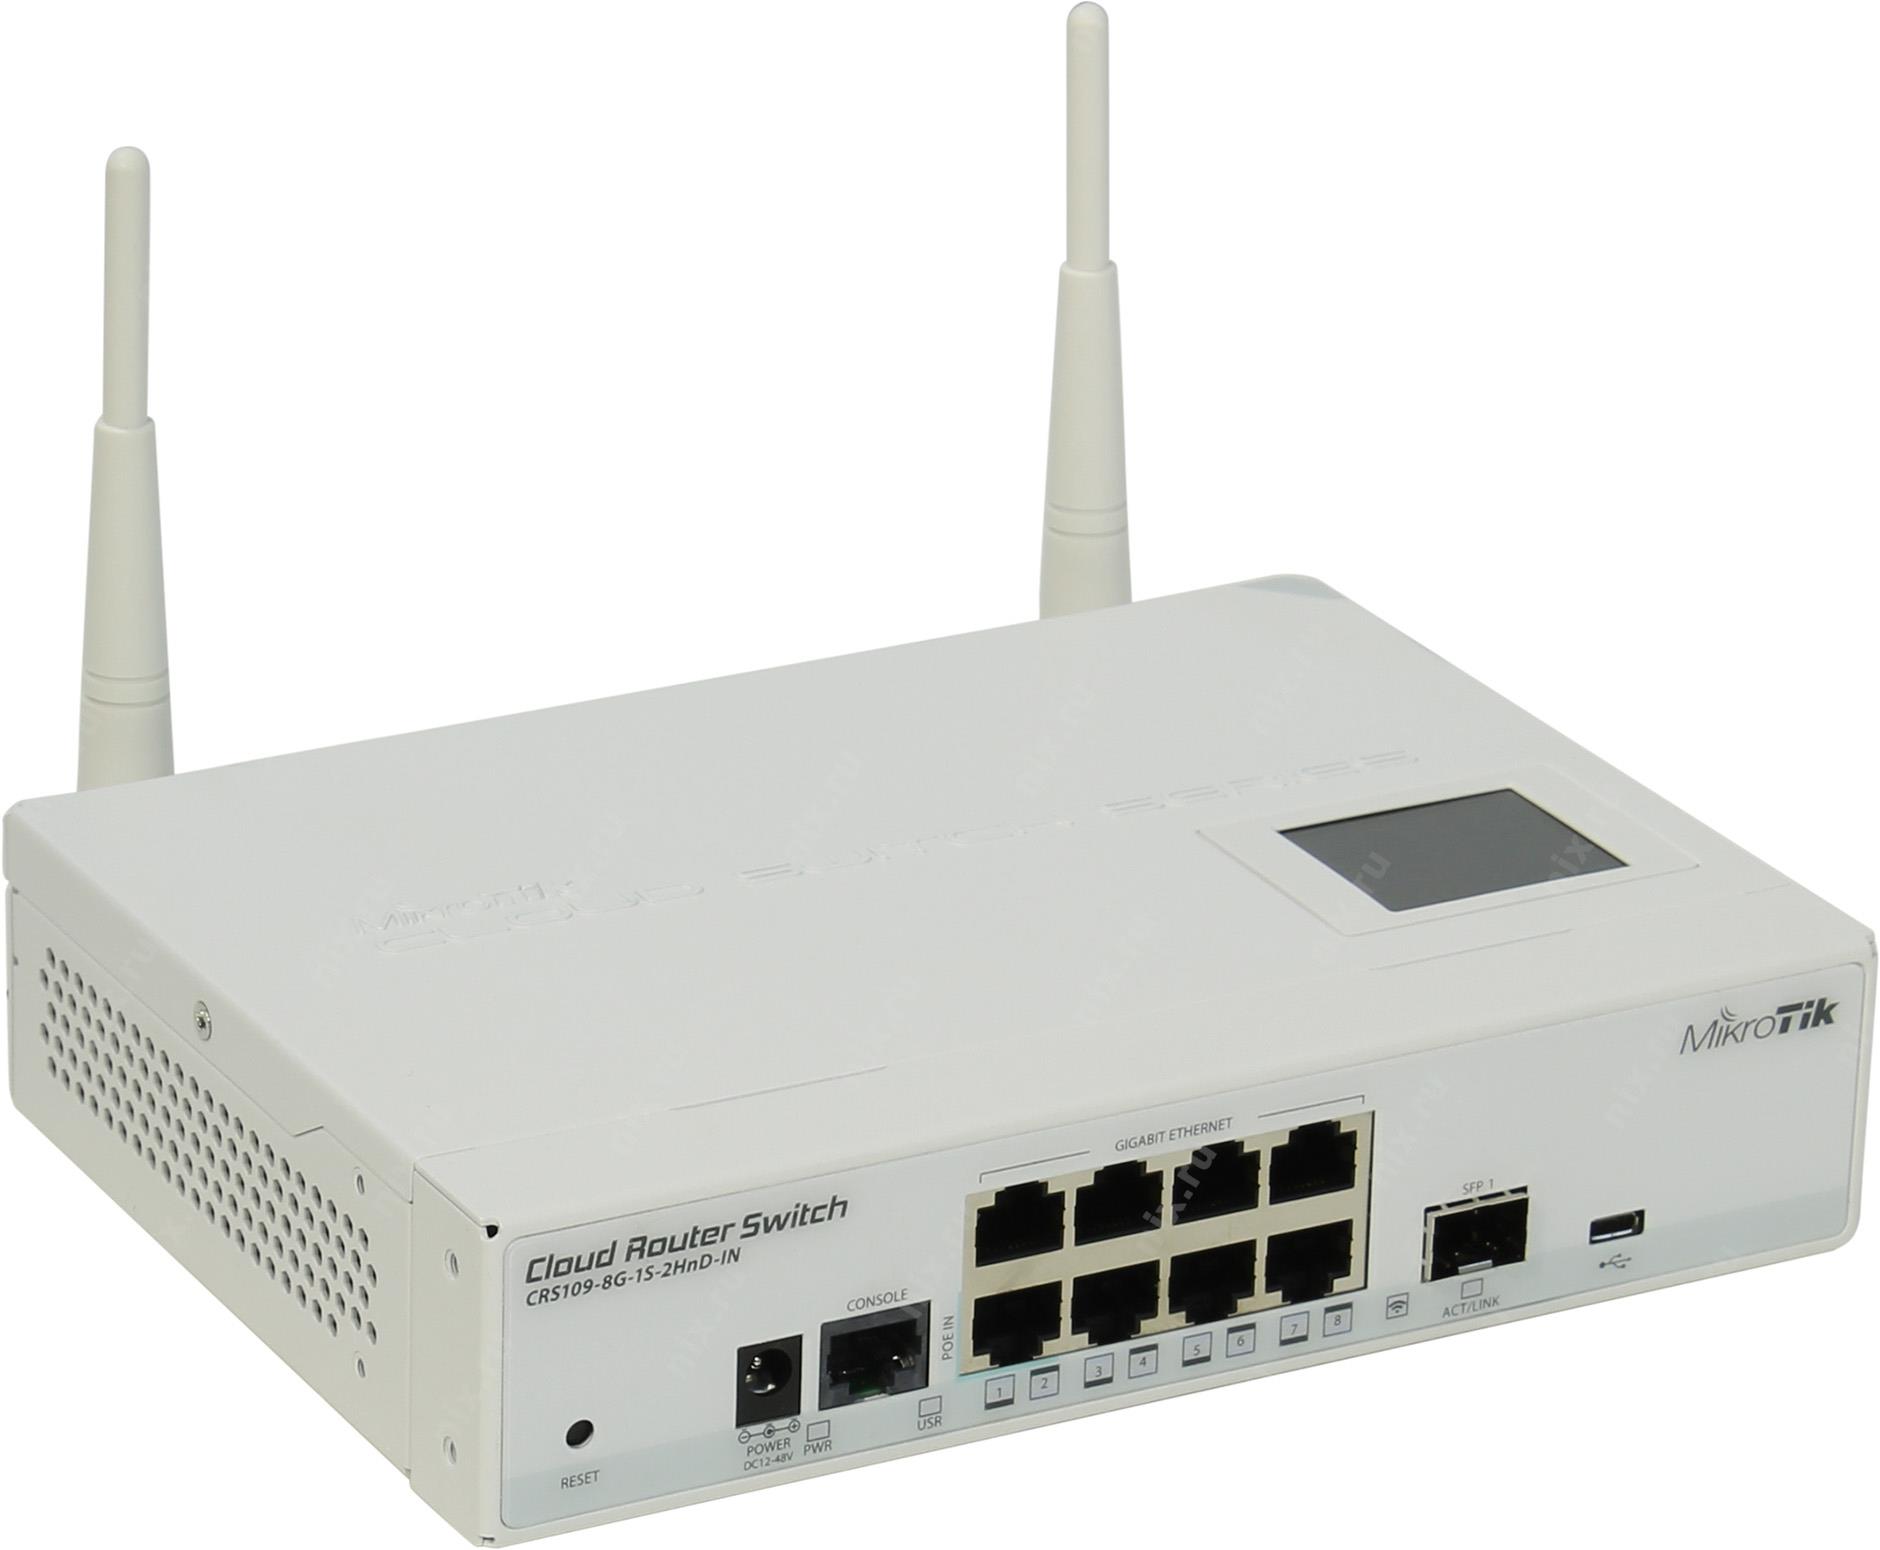 Маршрутизатор 8PORT 1000M CRS109-8G-1S-2HND-IN MIKROTIK